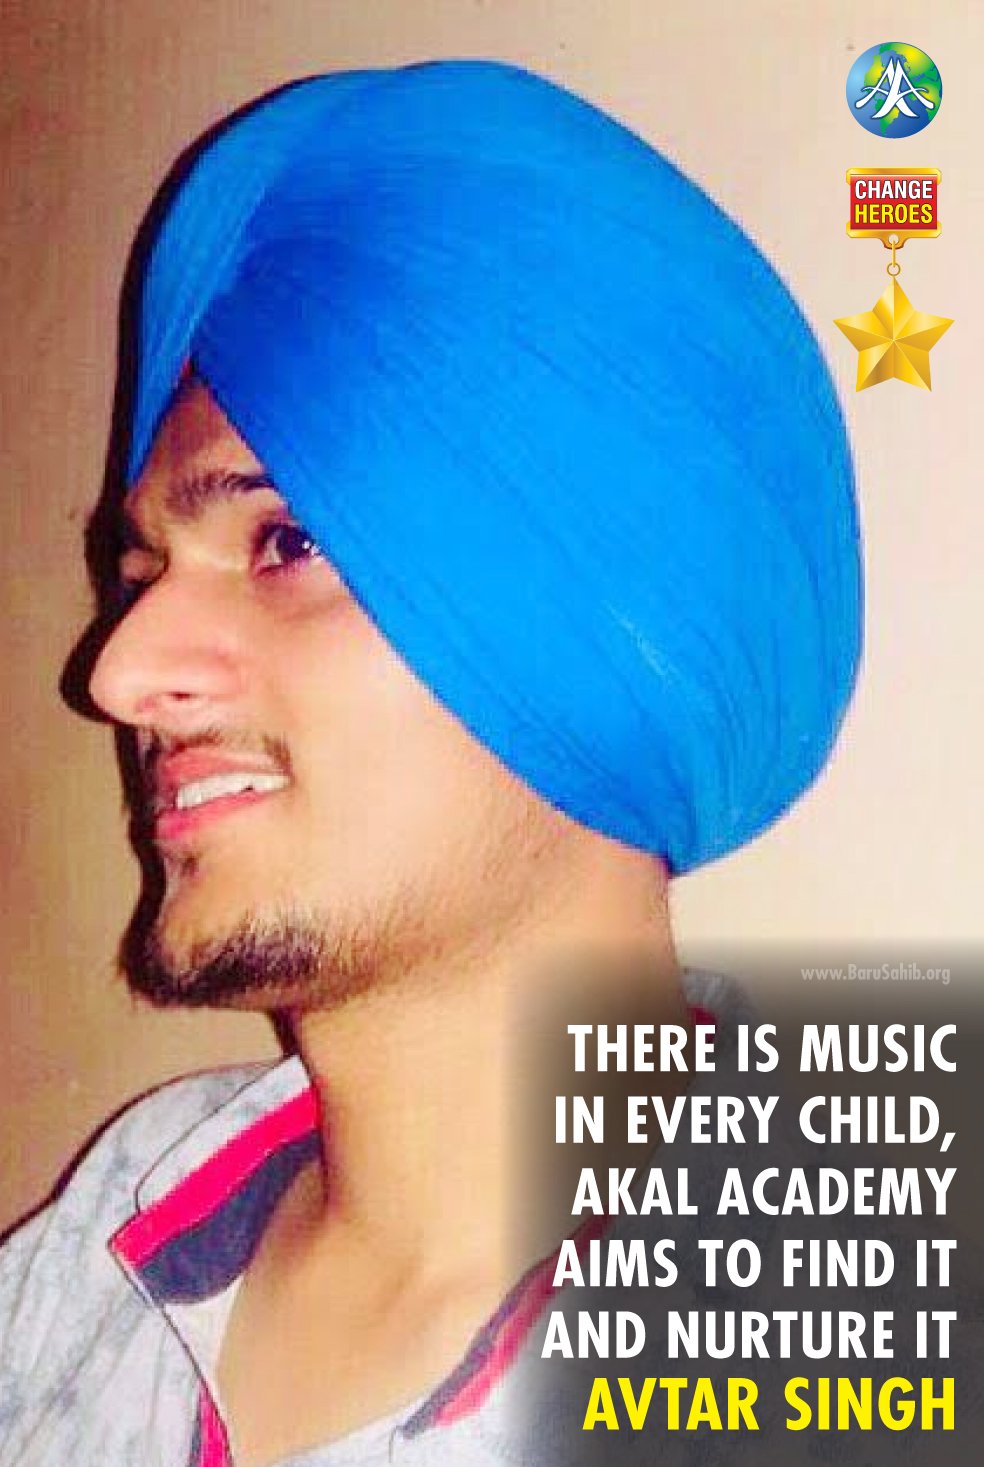 There is Music in every child, Akal Academy aims to find it and Nurture it. – A musical rhyme of our alumnus Avtar Singh Gill